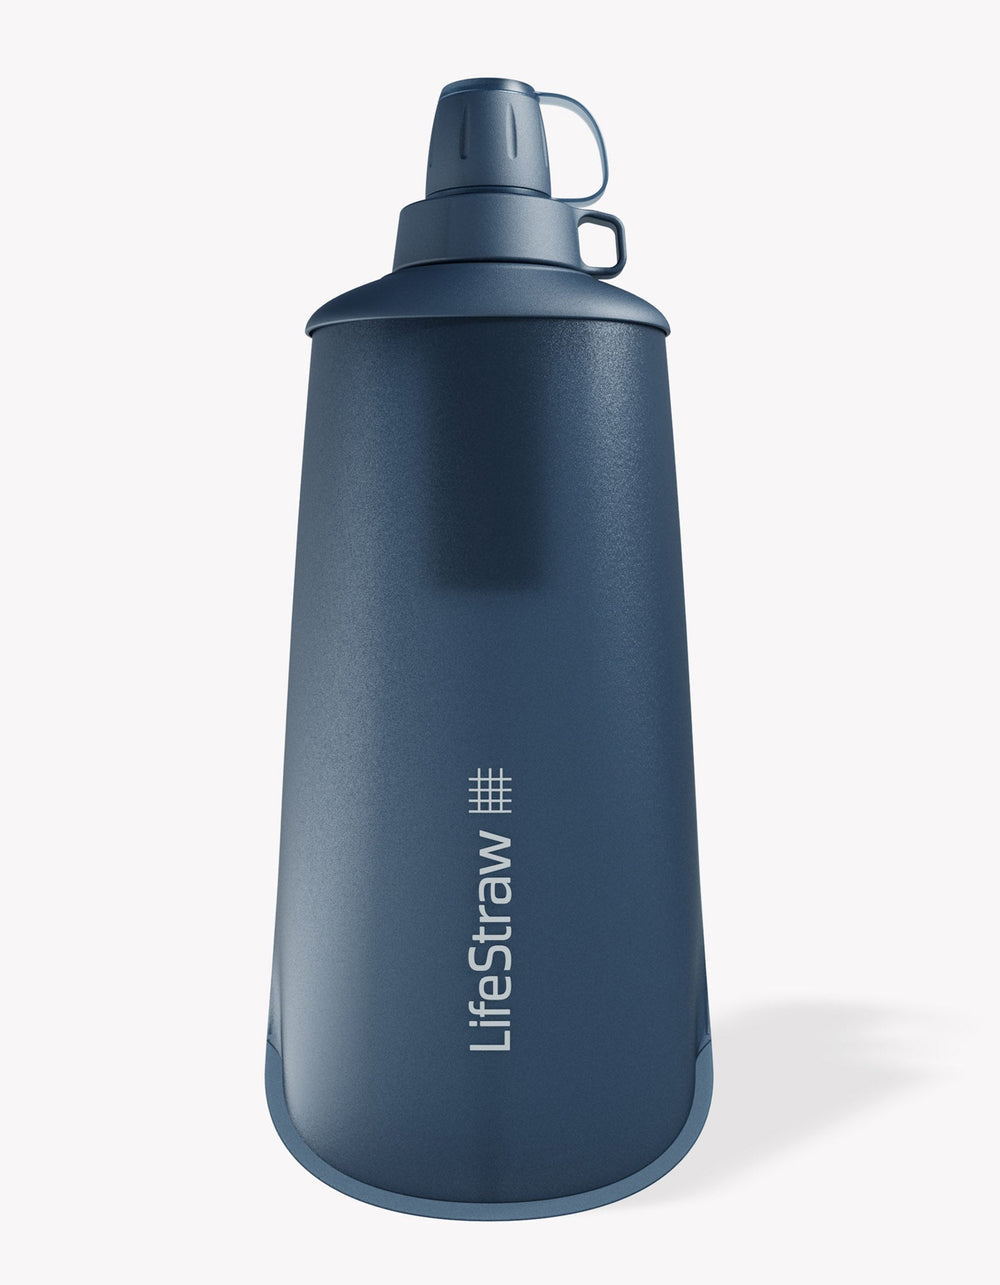 LifeStraw - 1Lt Collapsible Squeeze Bottle - Mountain Blue